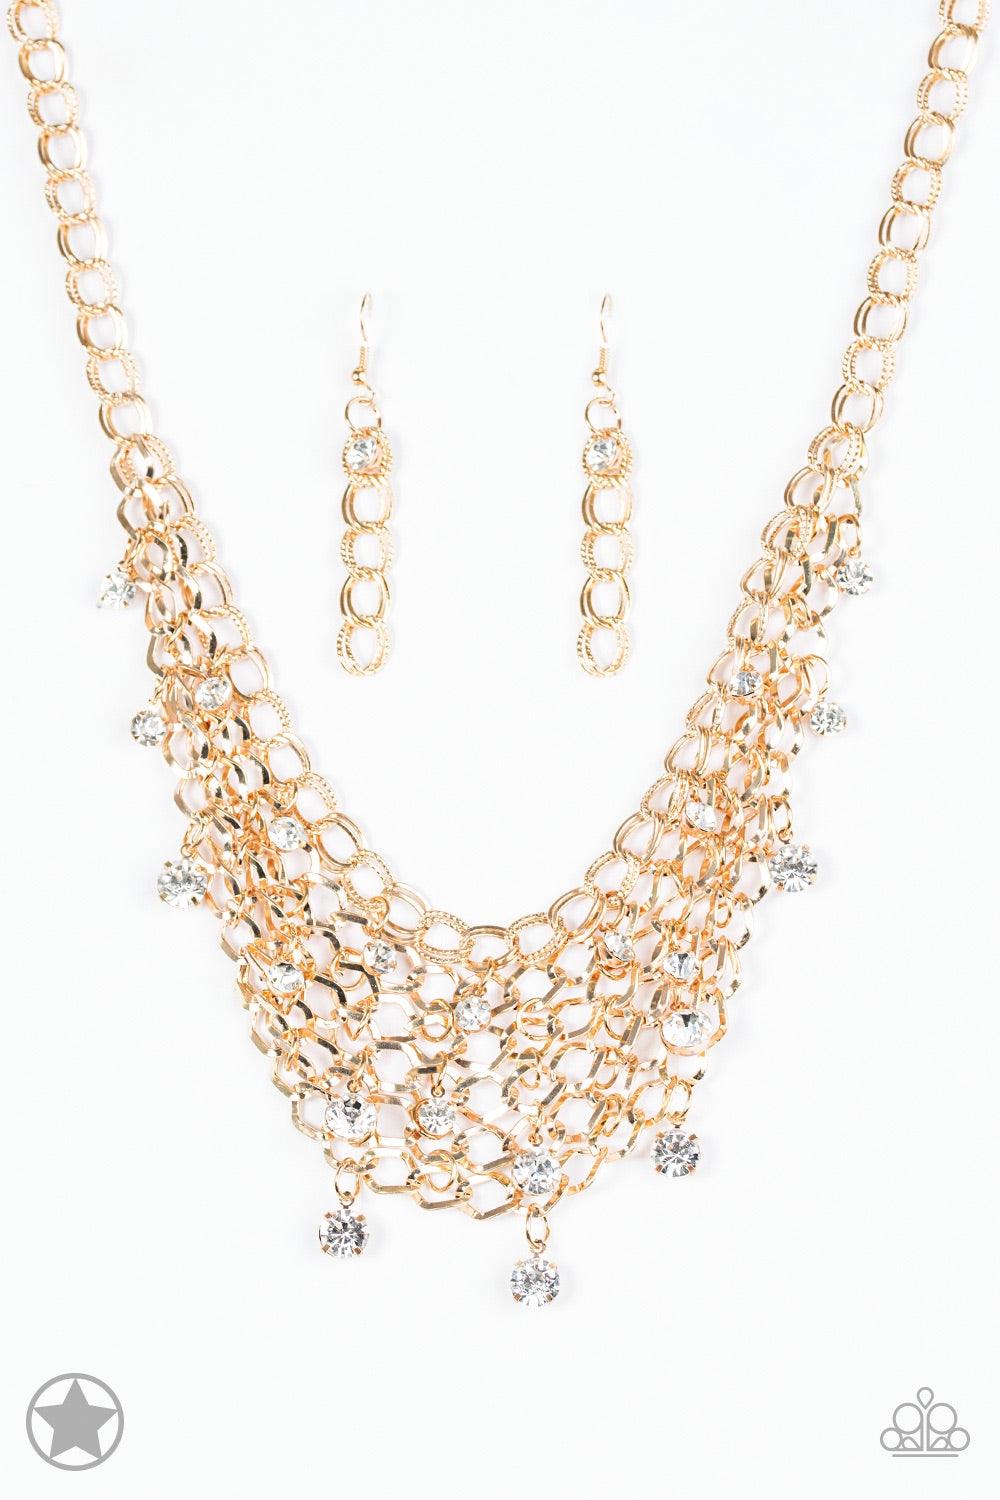 Paparazzi Accessories Fishing For Compliments - Gold A collar of layered interlocking gold chain provides the canvas for gorgeous clear rhinestones to sway delicately. Features an adjustable clasp closure. Jewelry